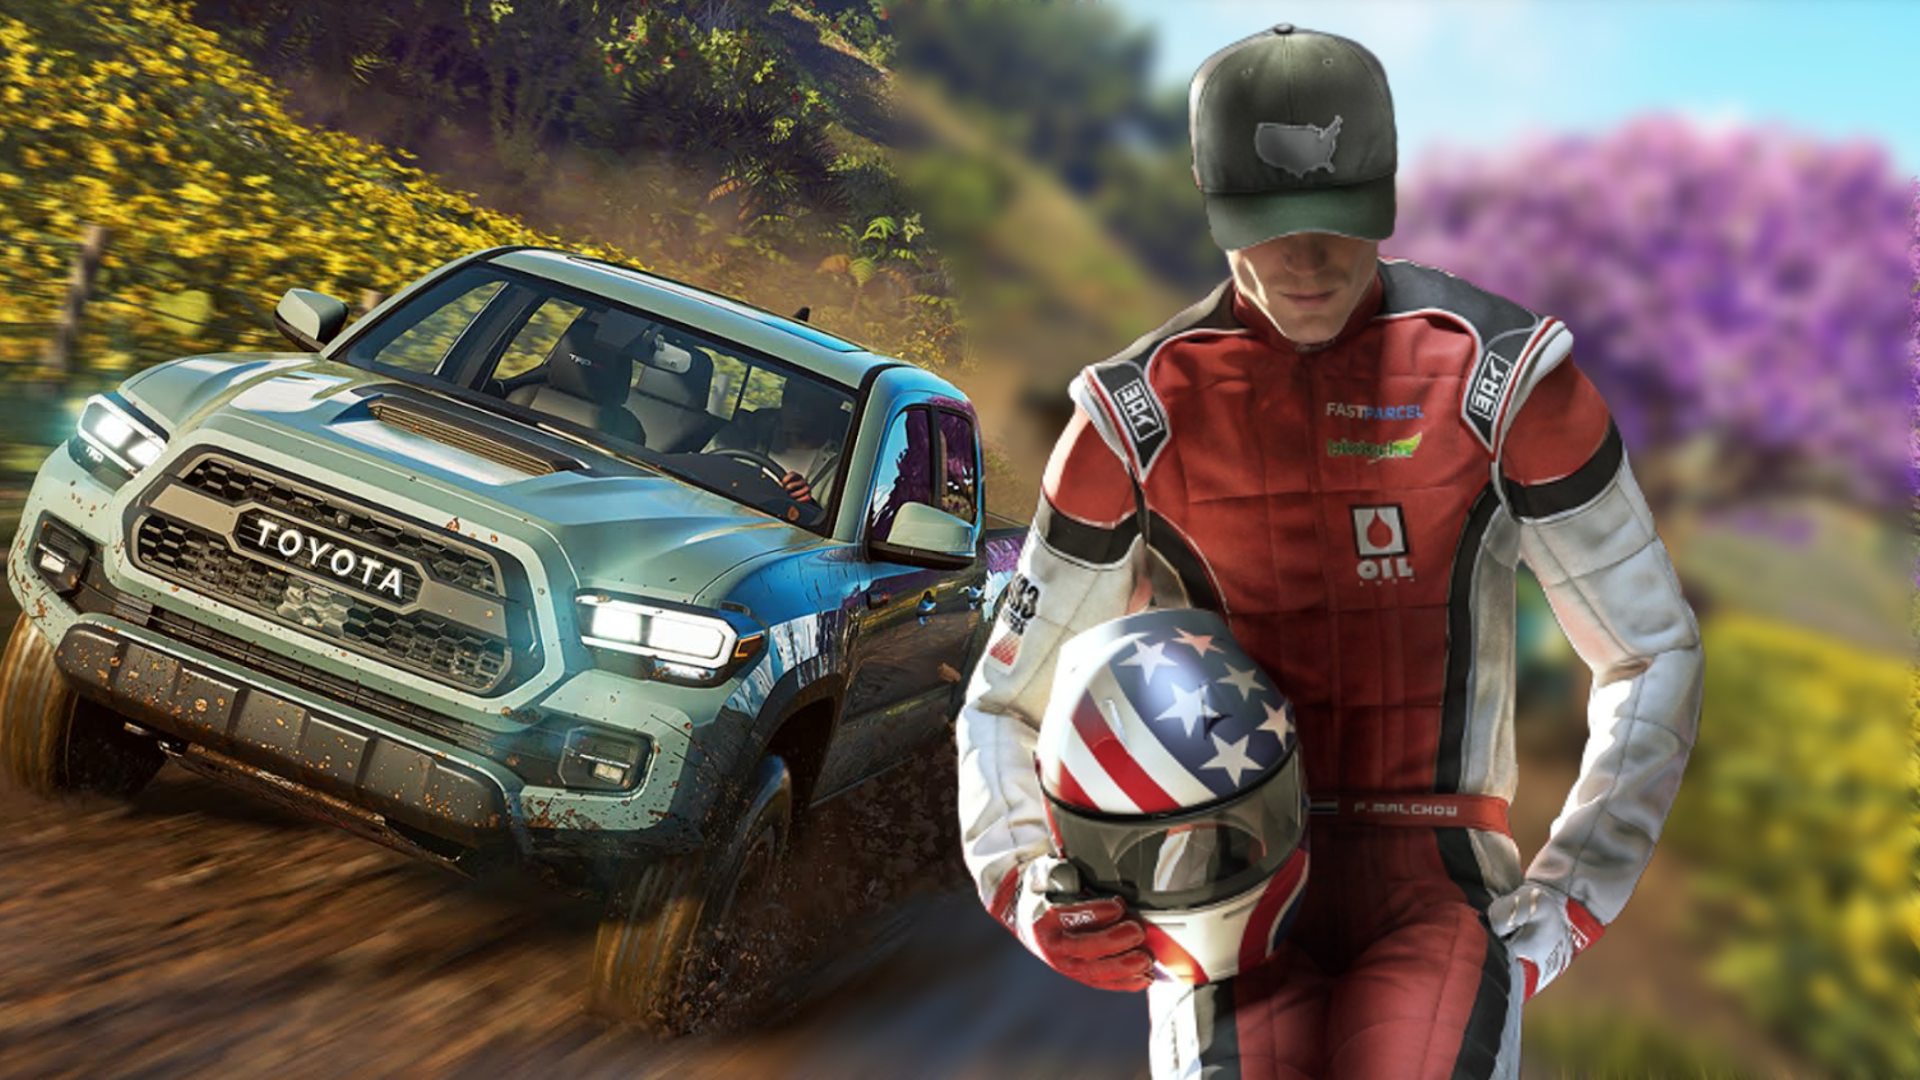 Is The Crew 2 Cross Platform ( PC, PS5, Xbox One, PS4) 2023